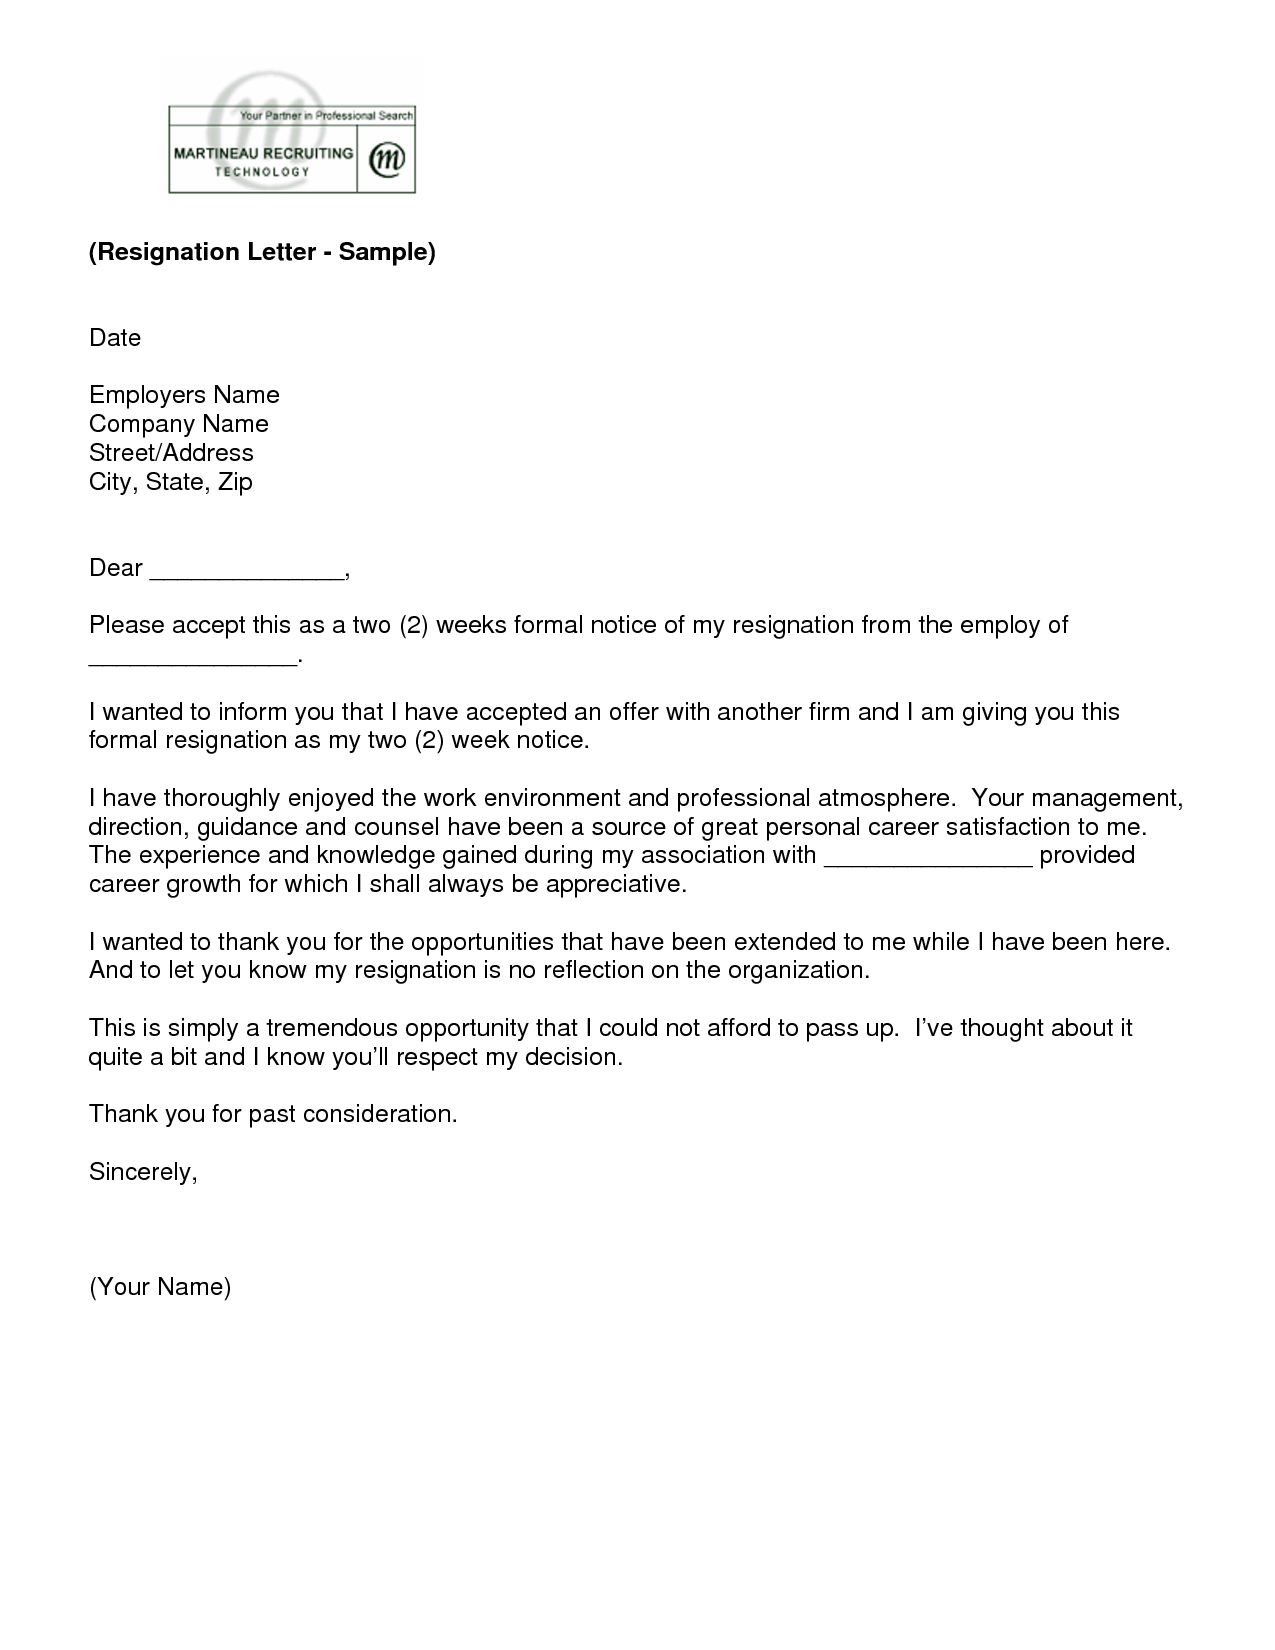 Letter Of Resignation 2 Weeks Notice Template | Resignation Throughout Two Week Notice Template Word